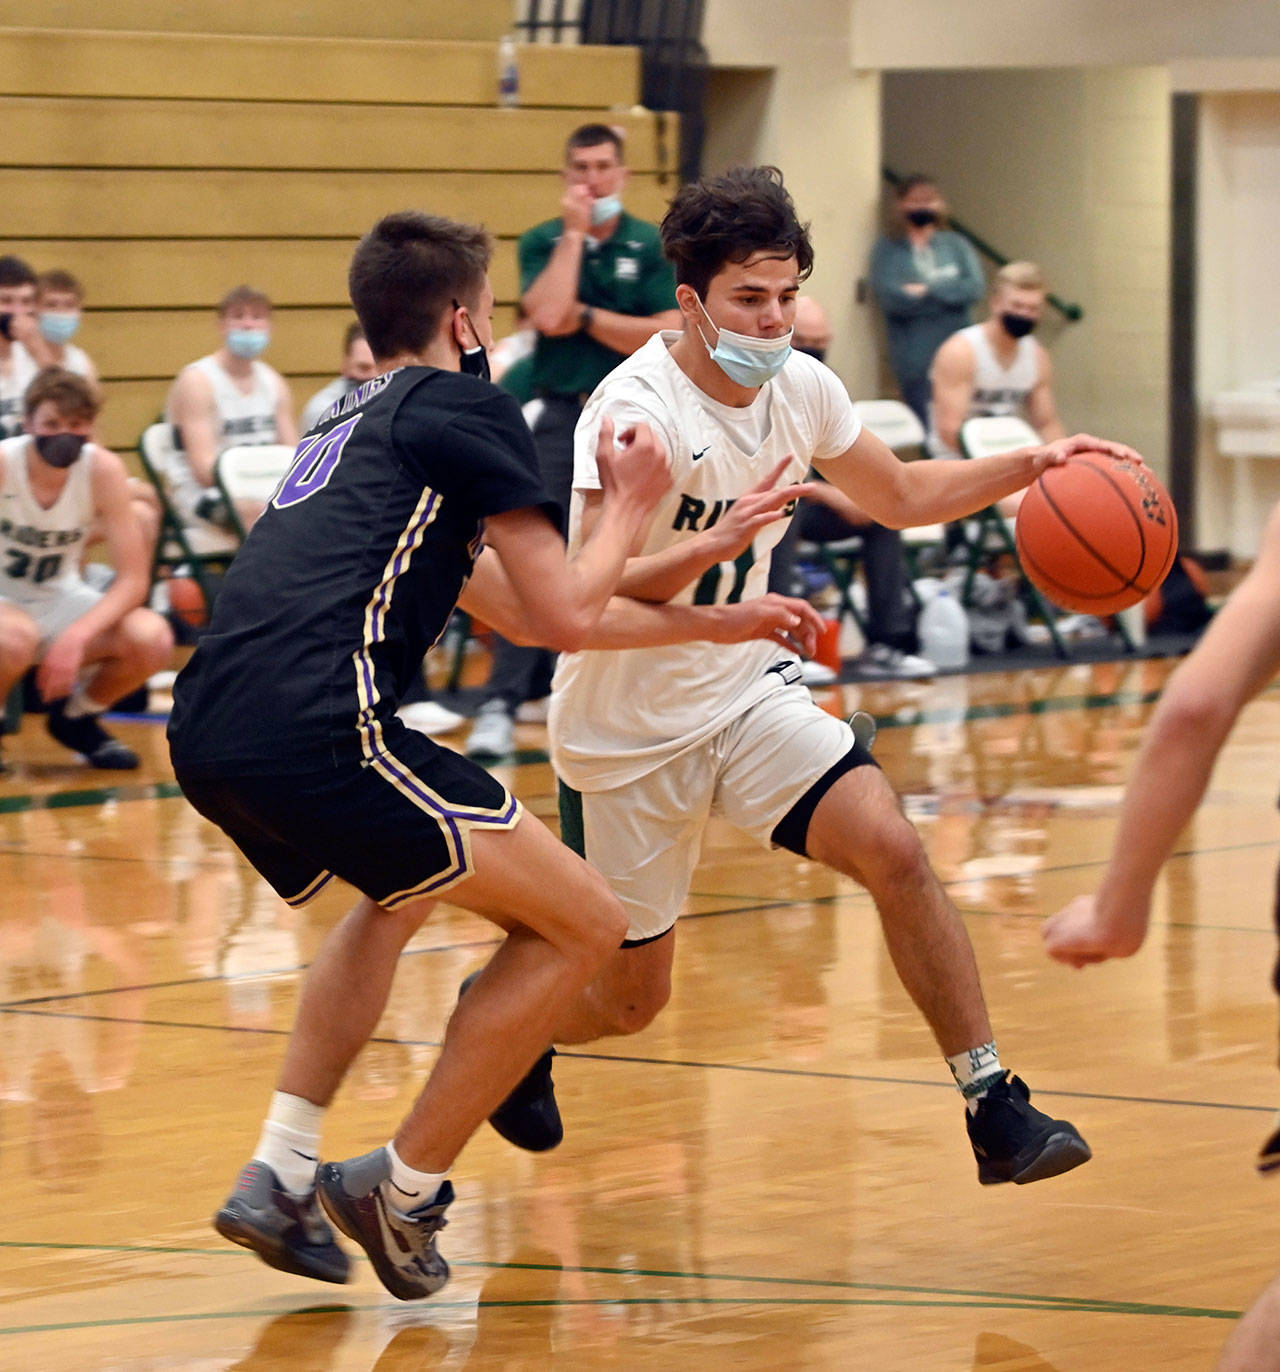 Michael Dashiell/Olympic Peninsula News Group Port Angeles’ Xander Maestas drives while defended by North Kitsap’s Cade Orness during the Riders’ 75-65 Olympic League Championship loss Wednesday. Maestas scored a game-high 28 points.